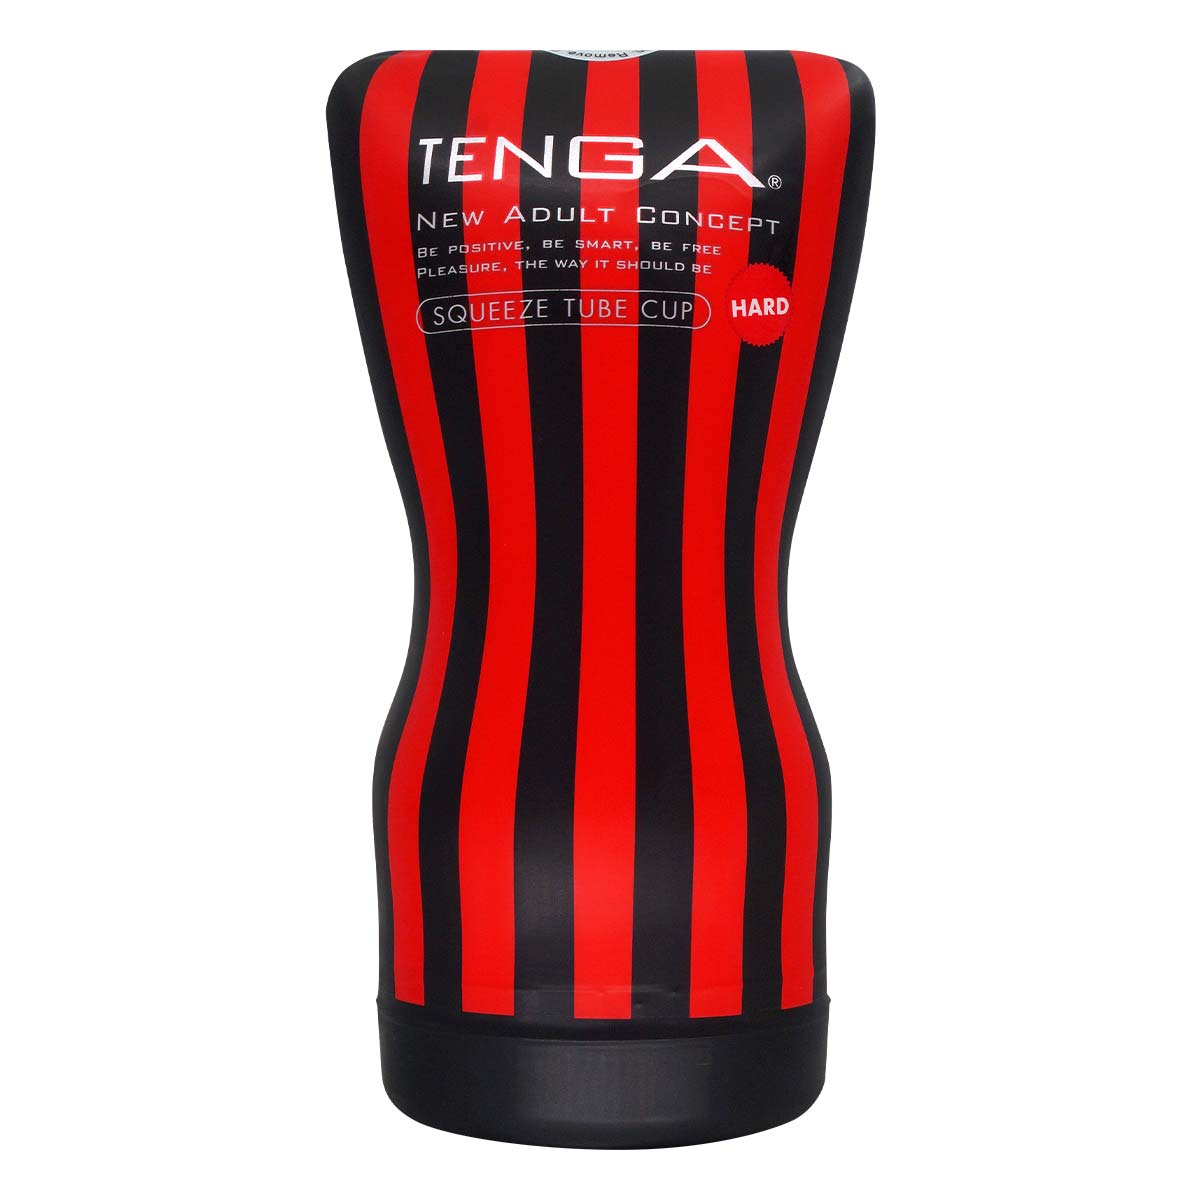 TENGA SQUEEZE TUBE CUP 2nd Generation HARD-p_2